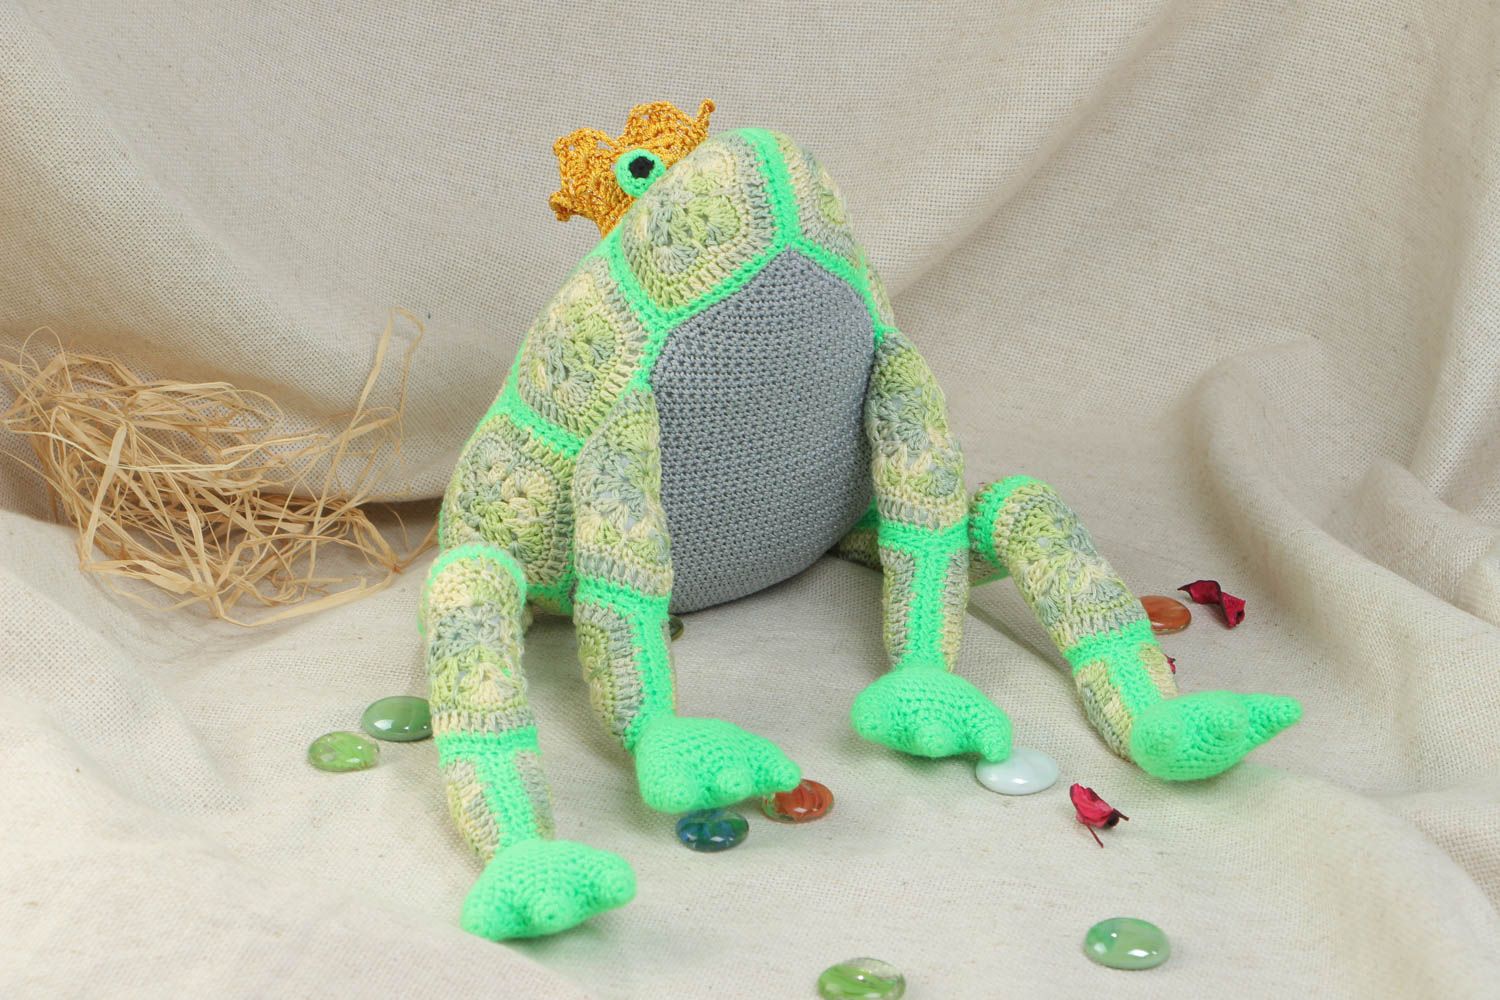 Homemade crochet soft toy frog for children and home decor photo 1